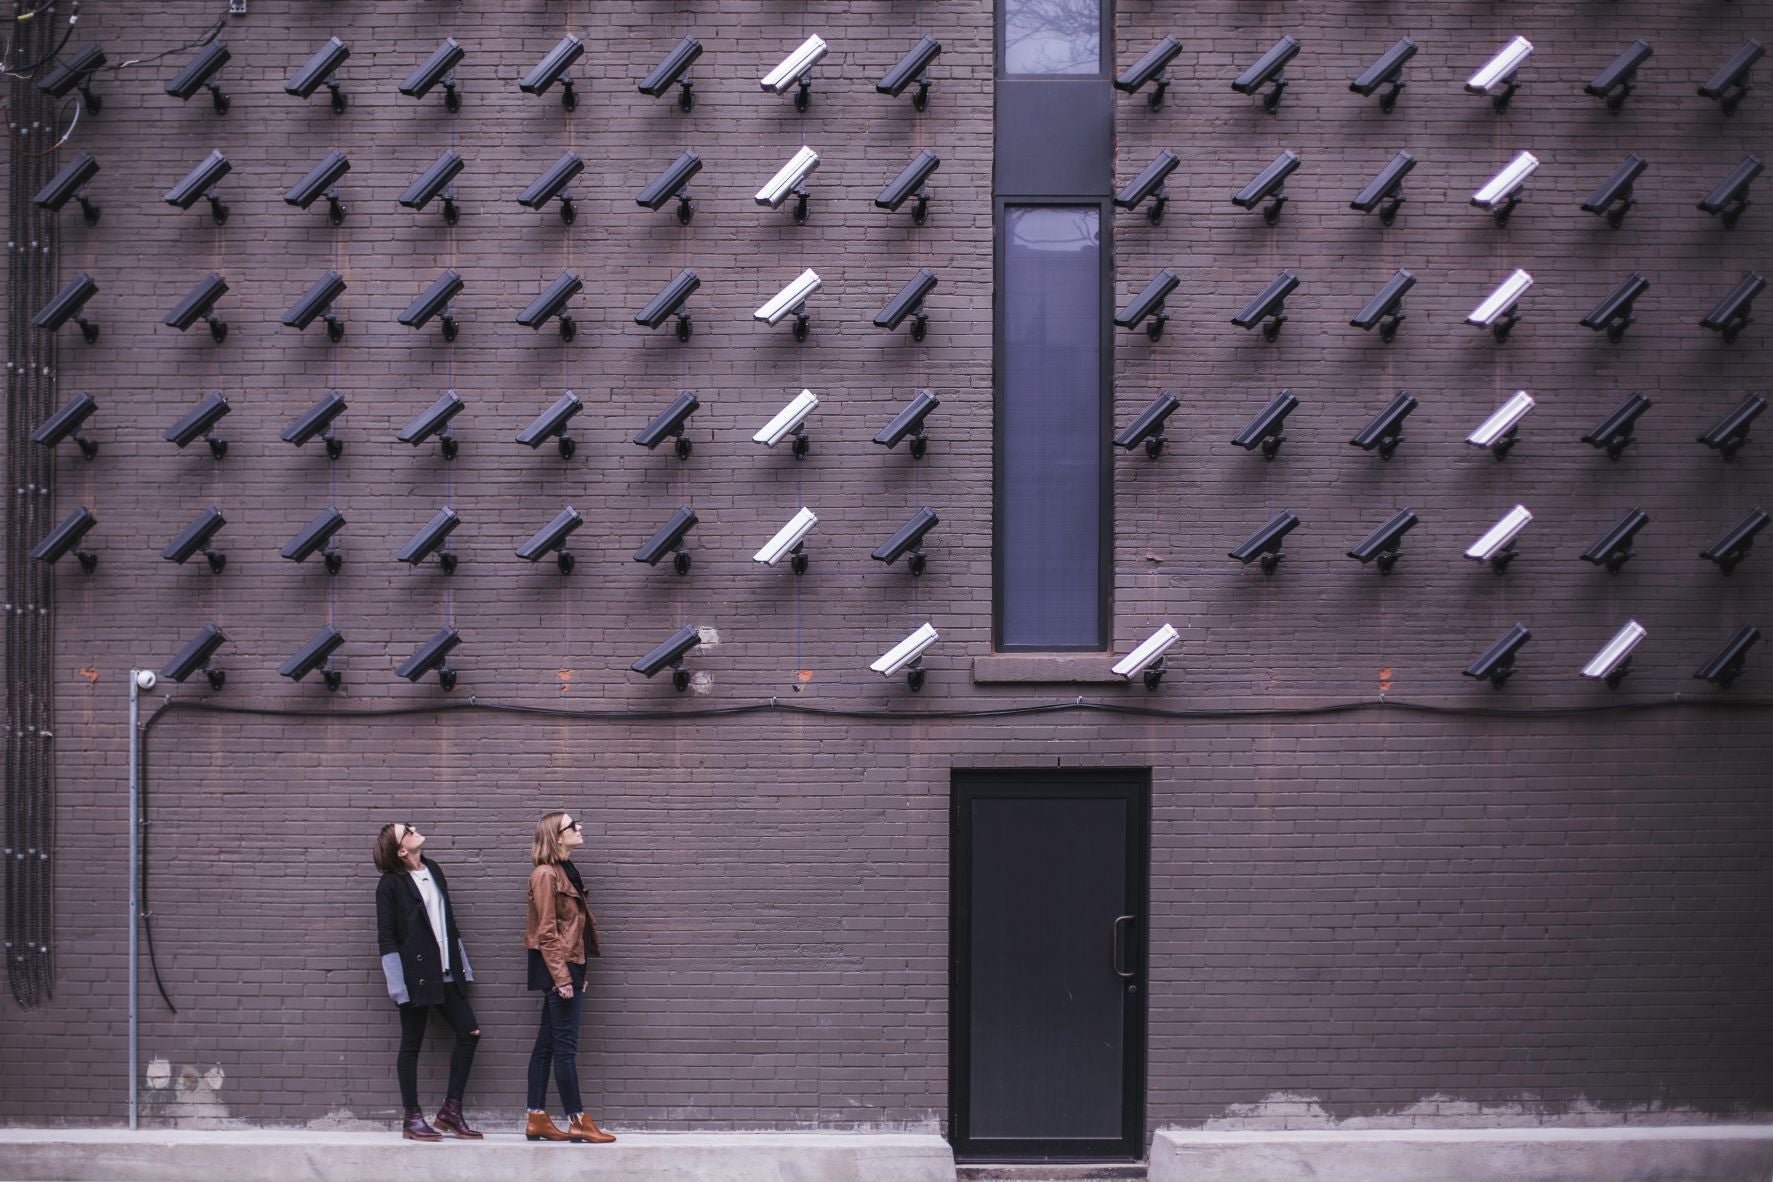 Two Person Standing Under Lot of Bullet Cctv Camera - Max Shestov article